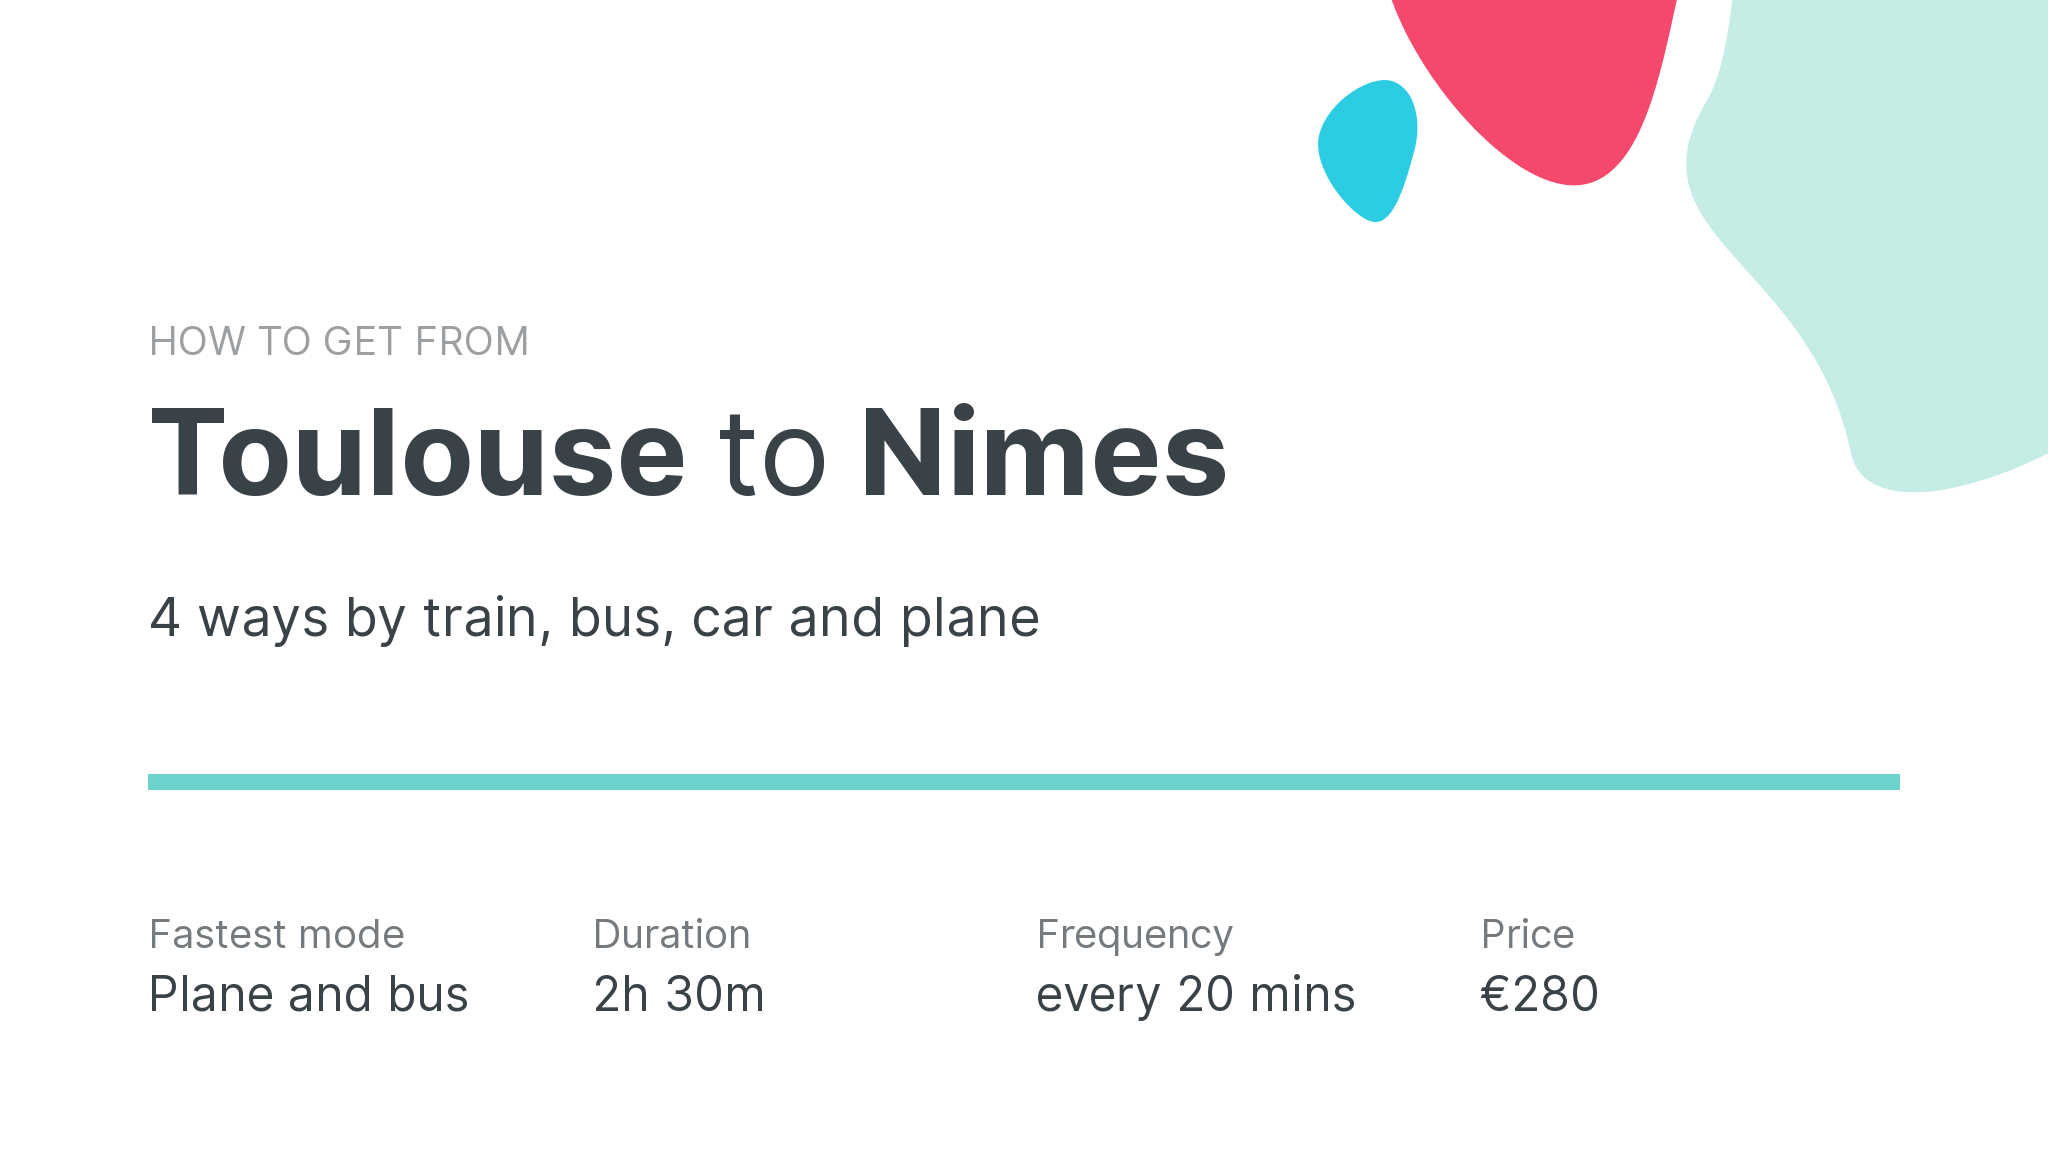 How do I get from Toulouse to Nimes